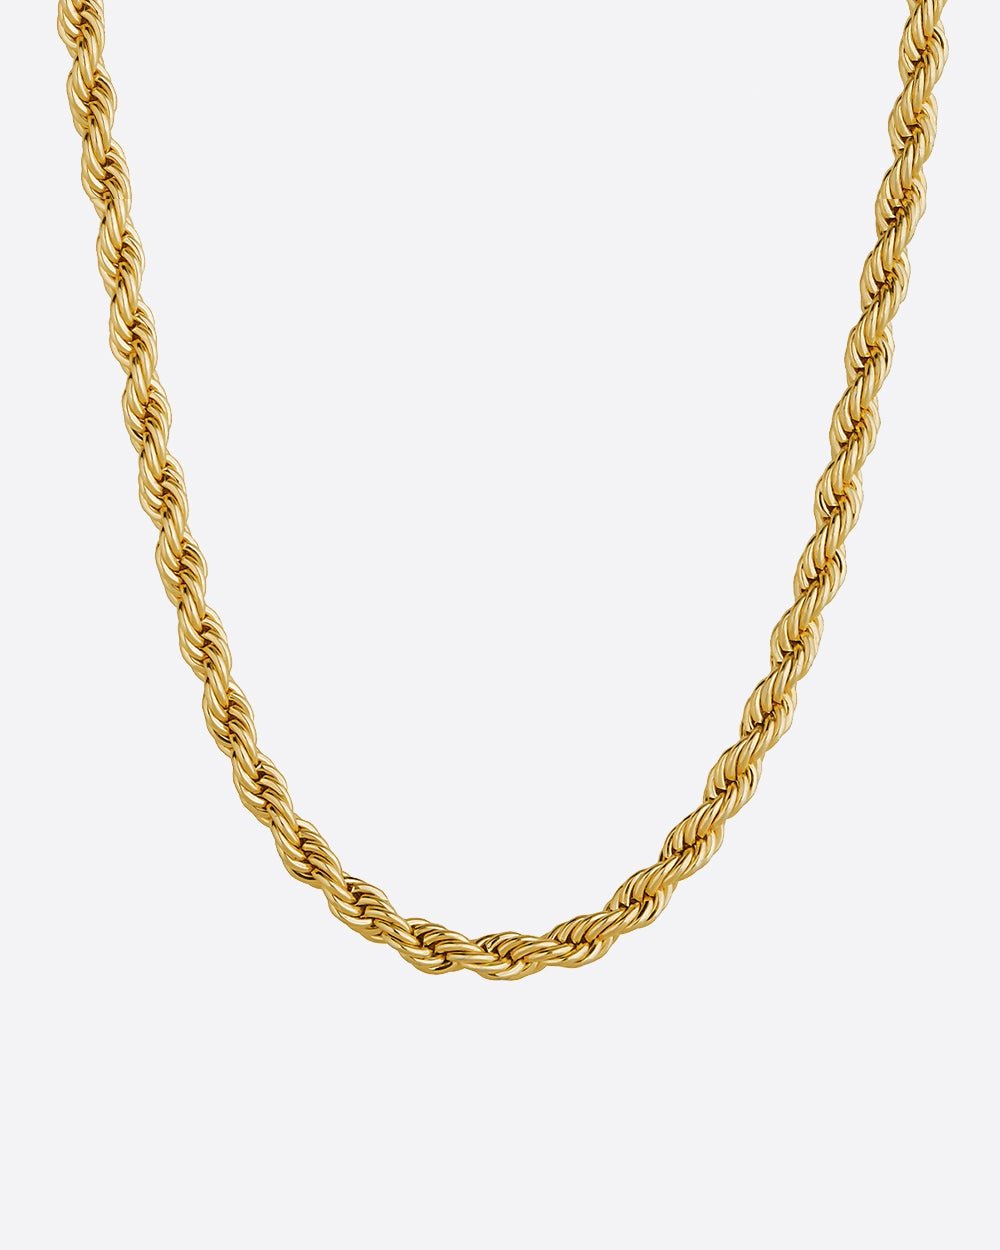 CLEAN ROPE CHAIN. - 3MM 18K GOLD